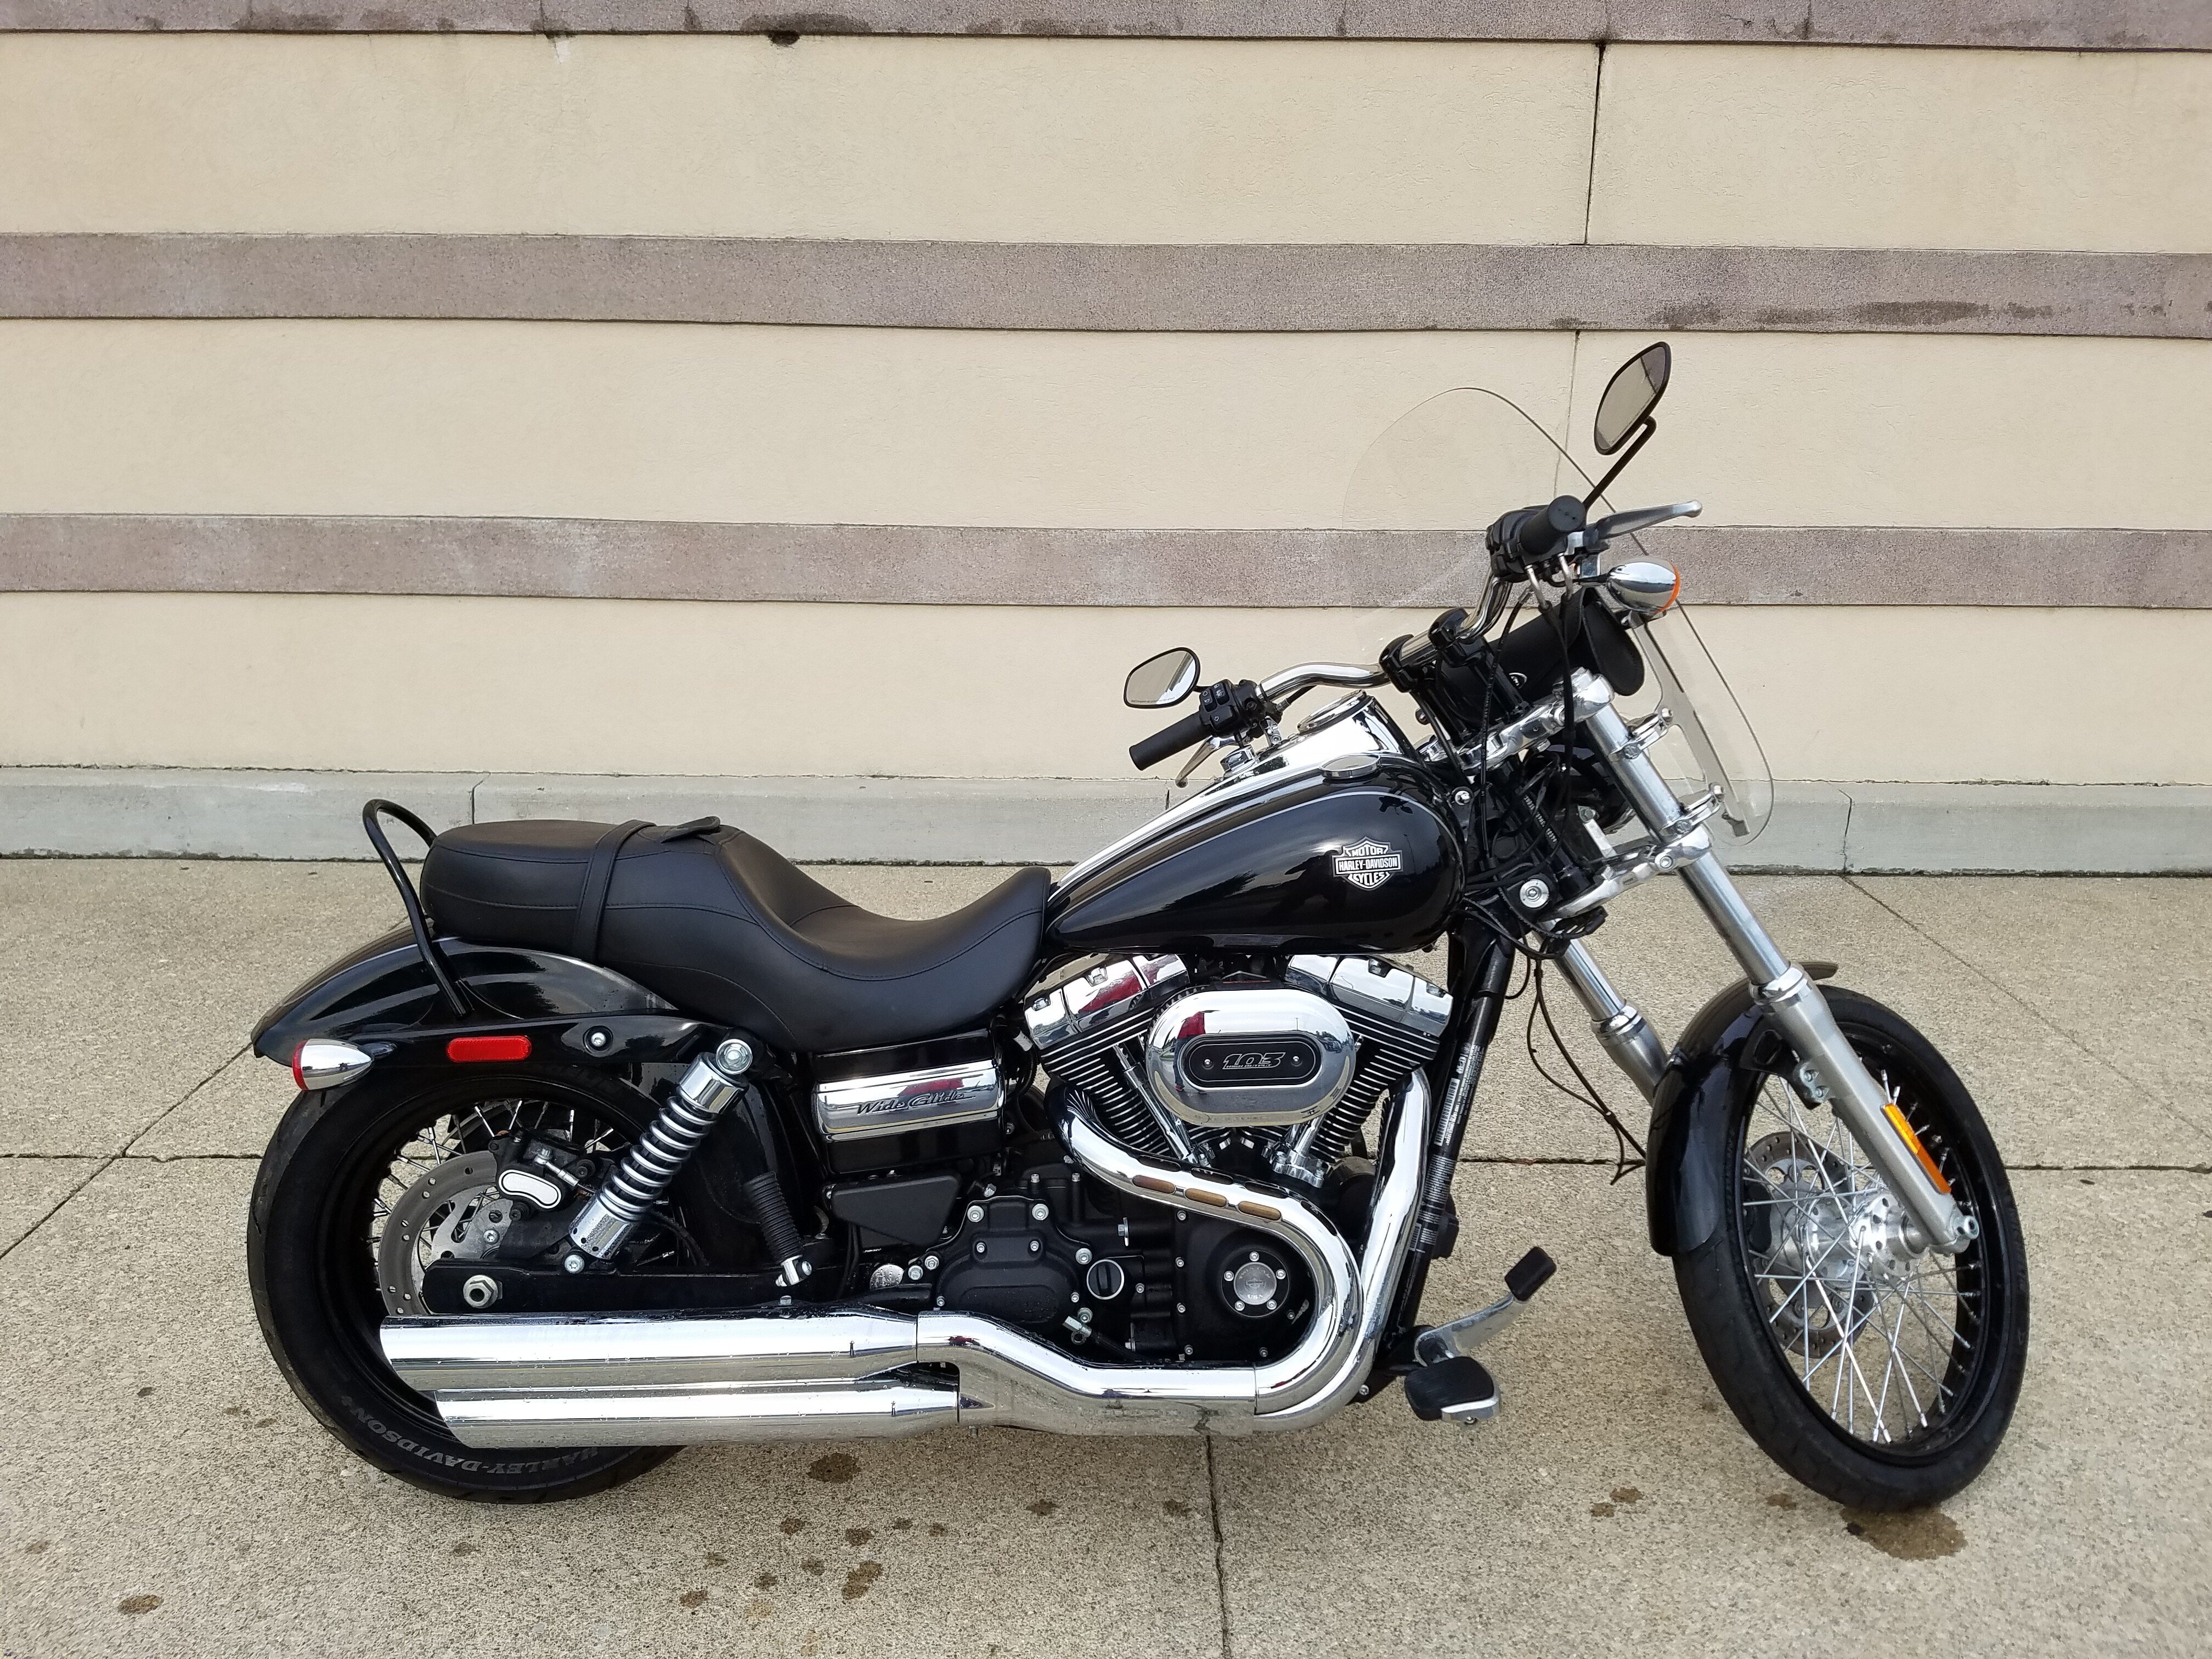 Motorcycles for Sale near Columbus, Ohio - Motorcycles on Autotrader